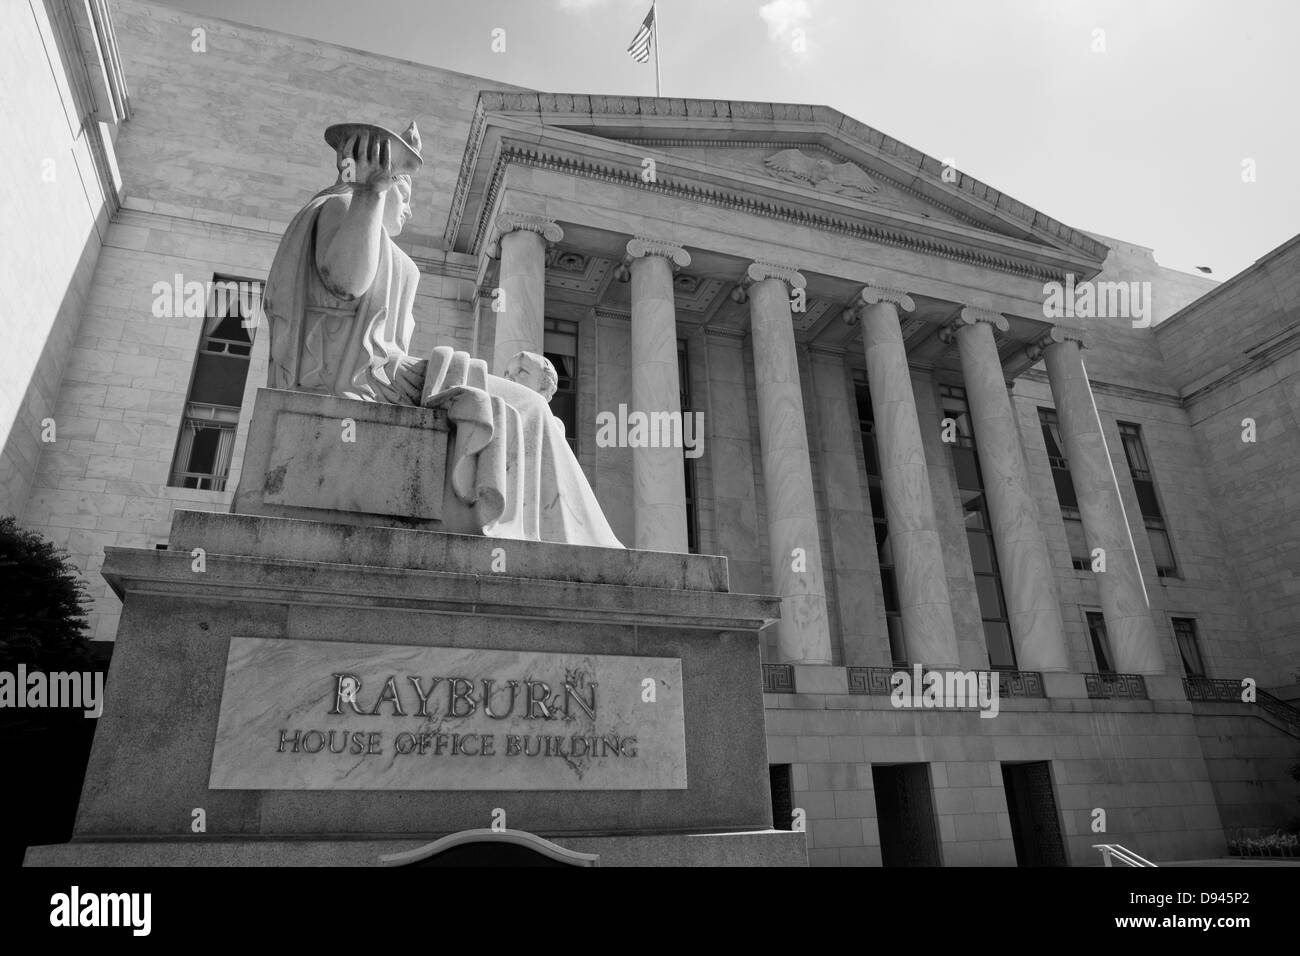 Rayburn House Office Building - Washington, DC USA Banque D'Images